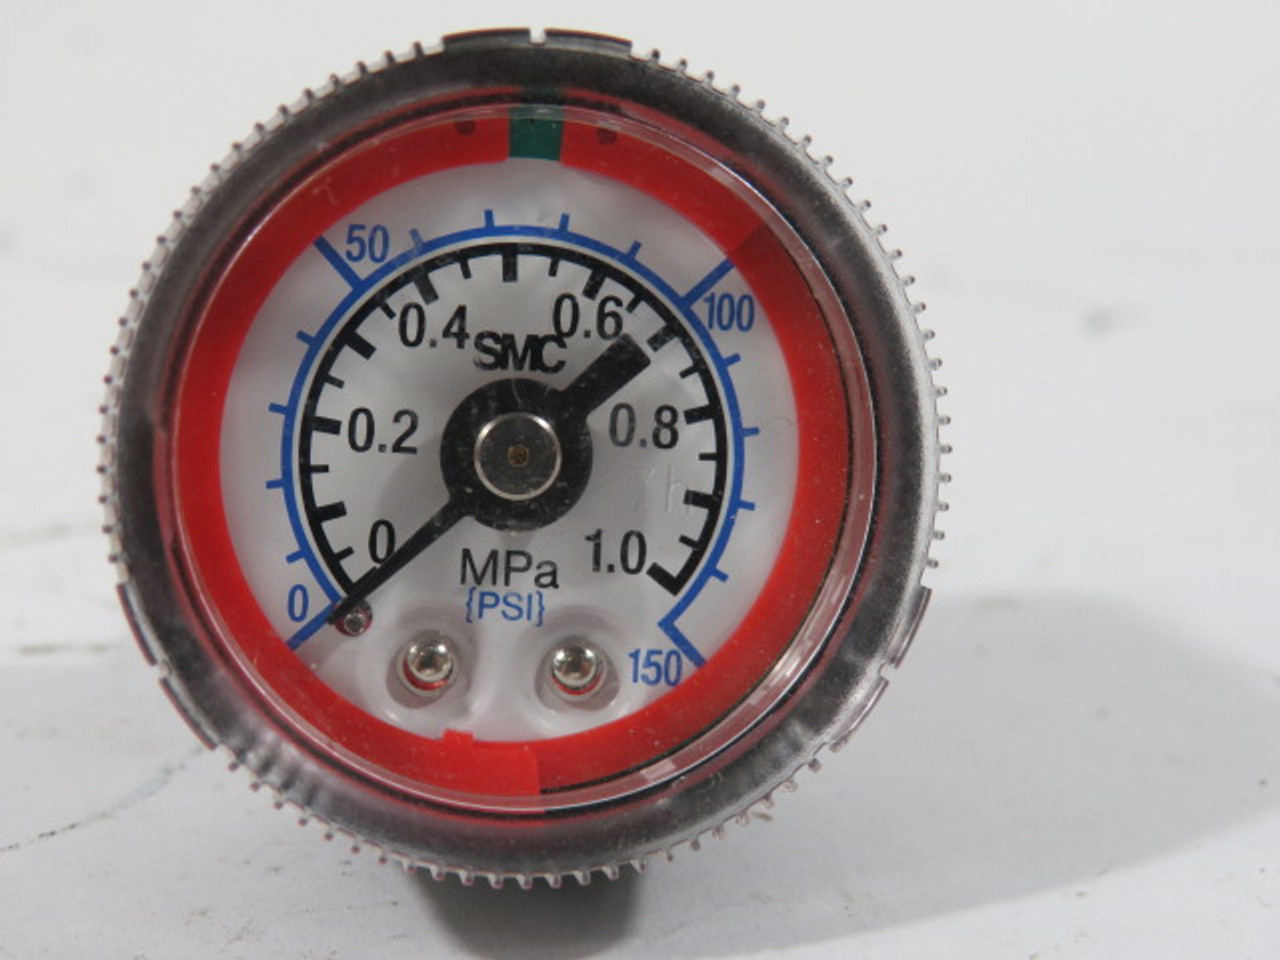 SMC G46-P10-02-L-X30 0-150psi 0-1.0MPa Back Connection Pressure Gauge USED